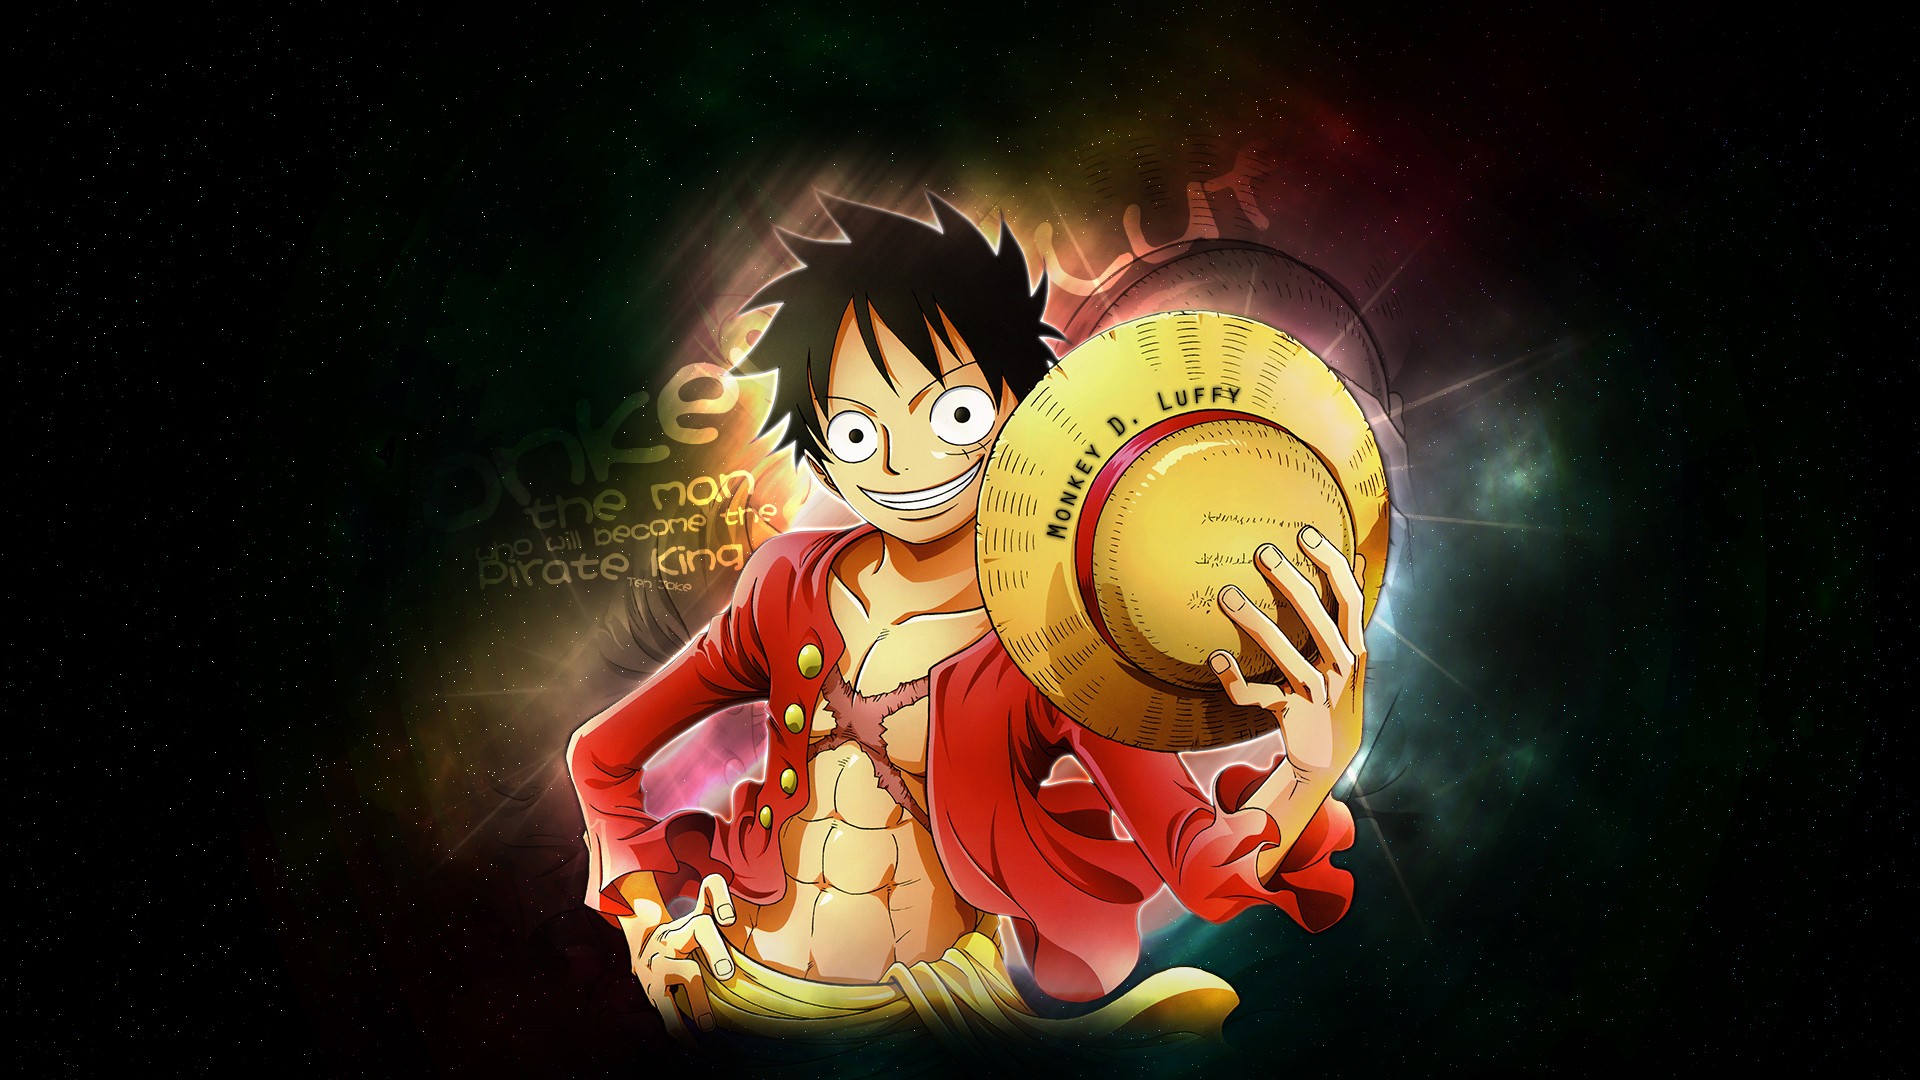 The gallery for One Piece Luffy Wallpaper Hd